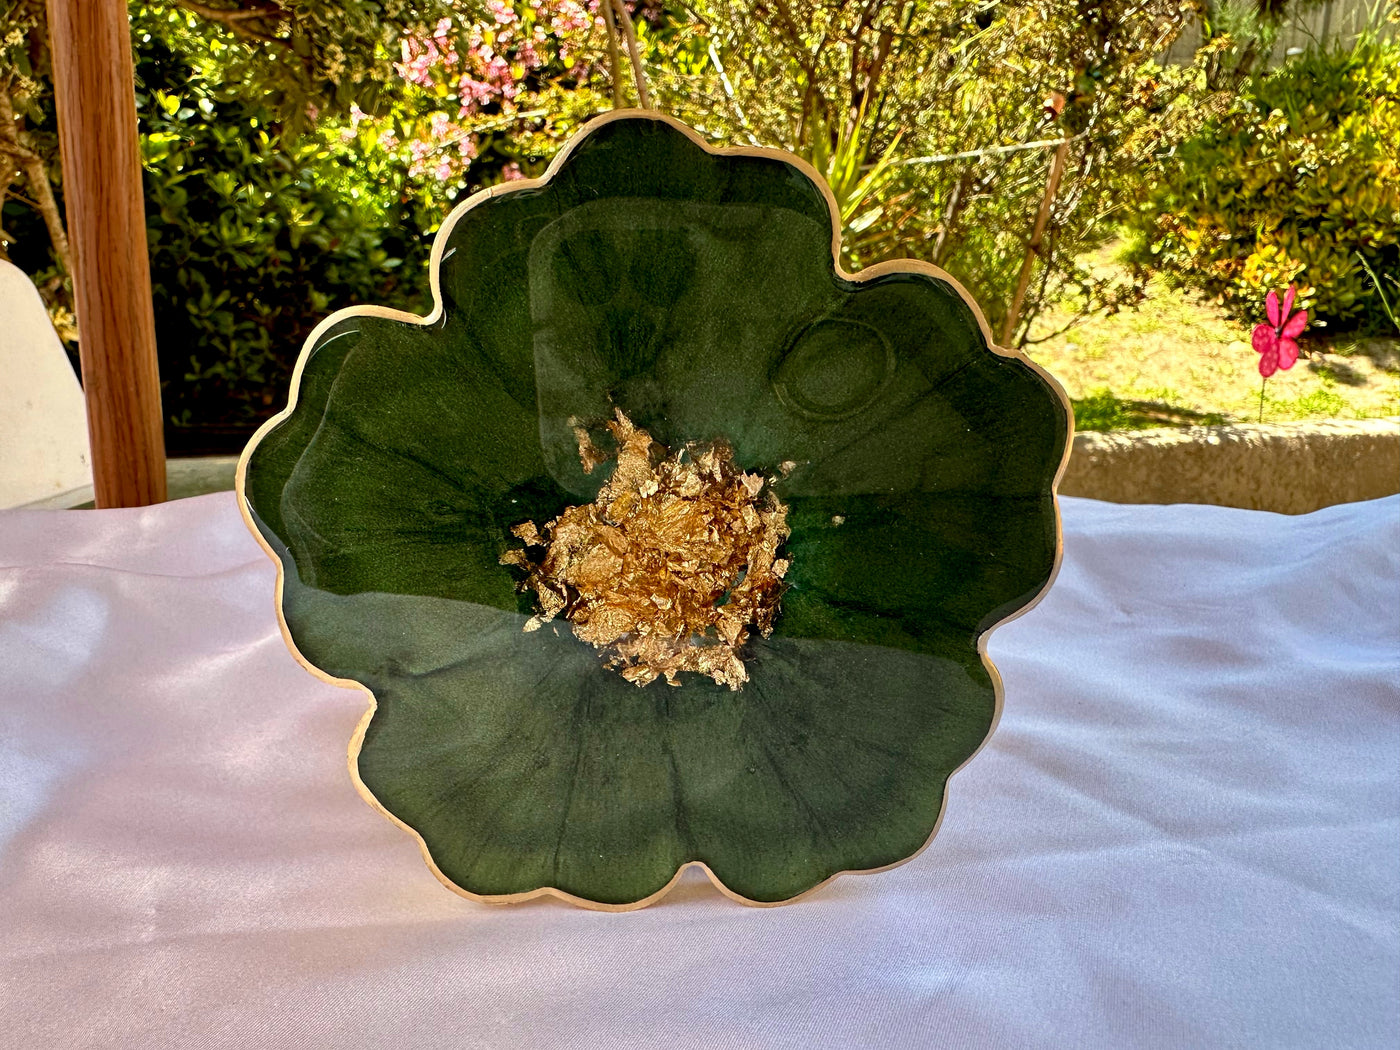 Handmade Forest Olive Green and Gold Resin Flower Shaped Coasters Set - Jasmin Renee Art - Single Coaster Standing Up  Gold Rim Edges